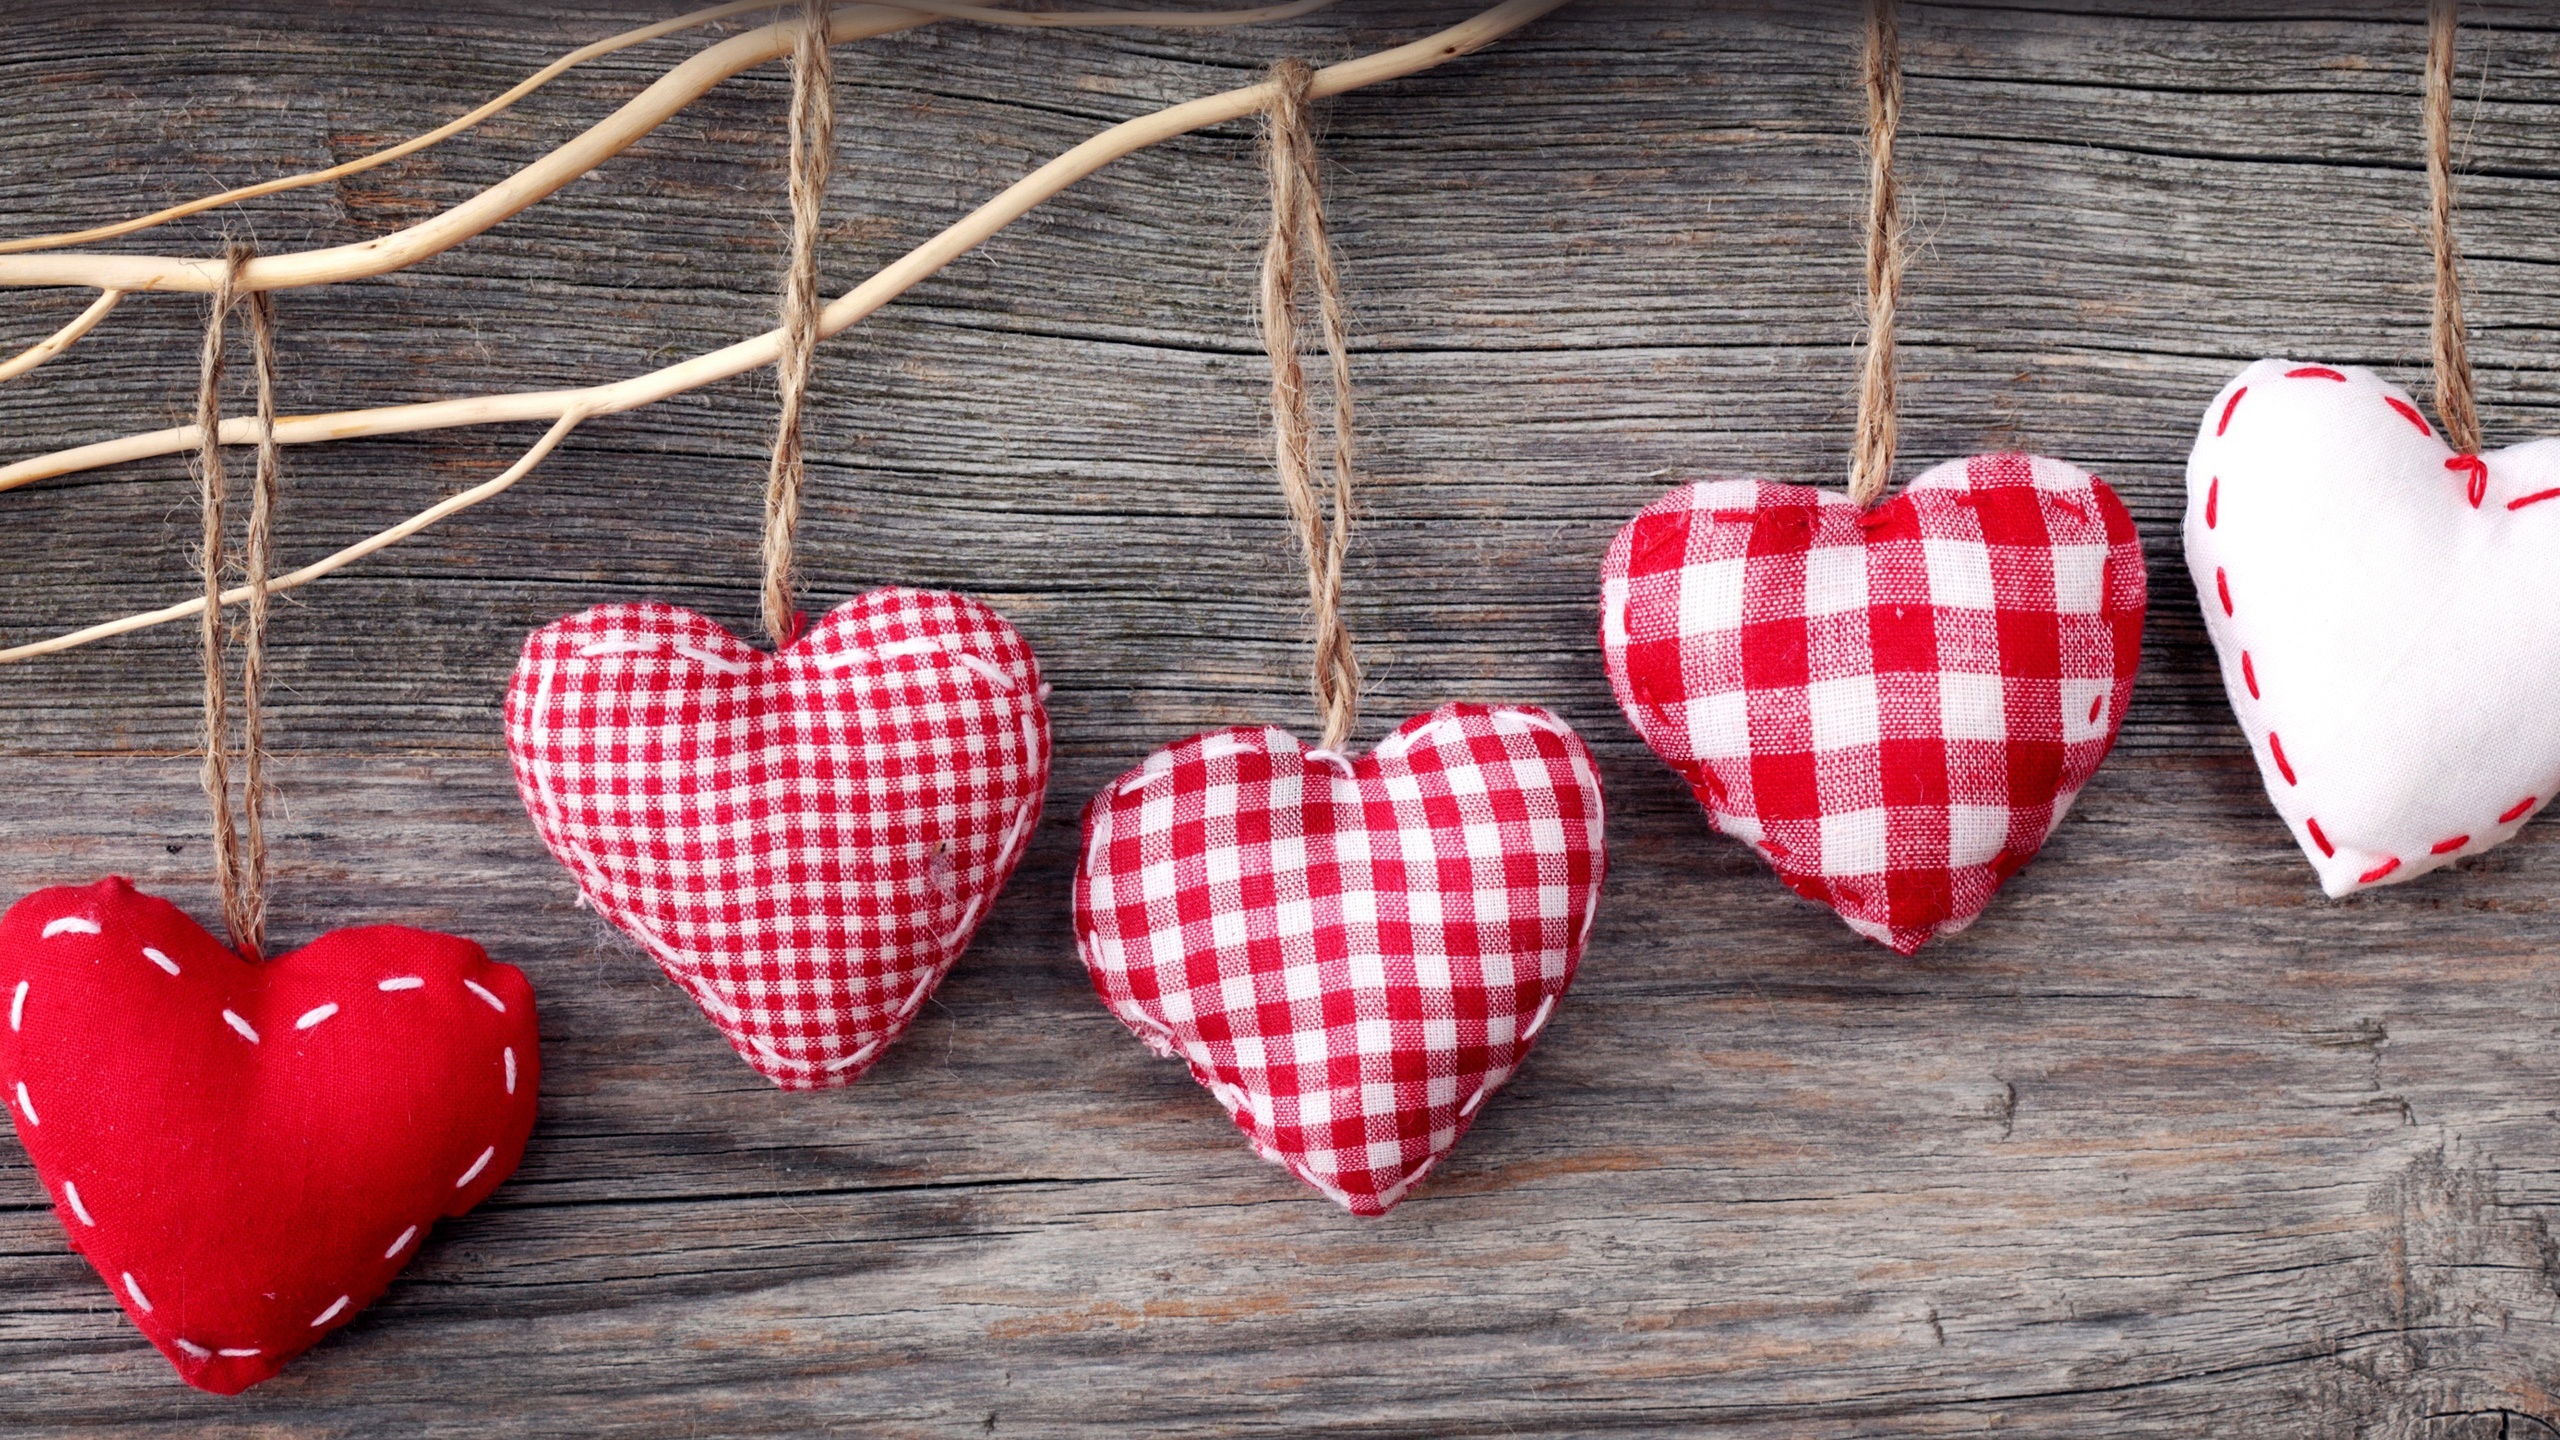 Wallpaper Handicrafts, Heart Shaped Cloth Jewelry 2560x1440 QHD Picture, Image